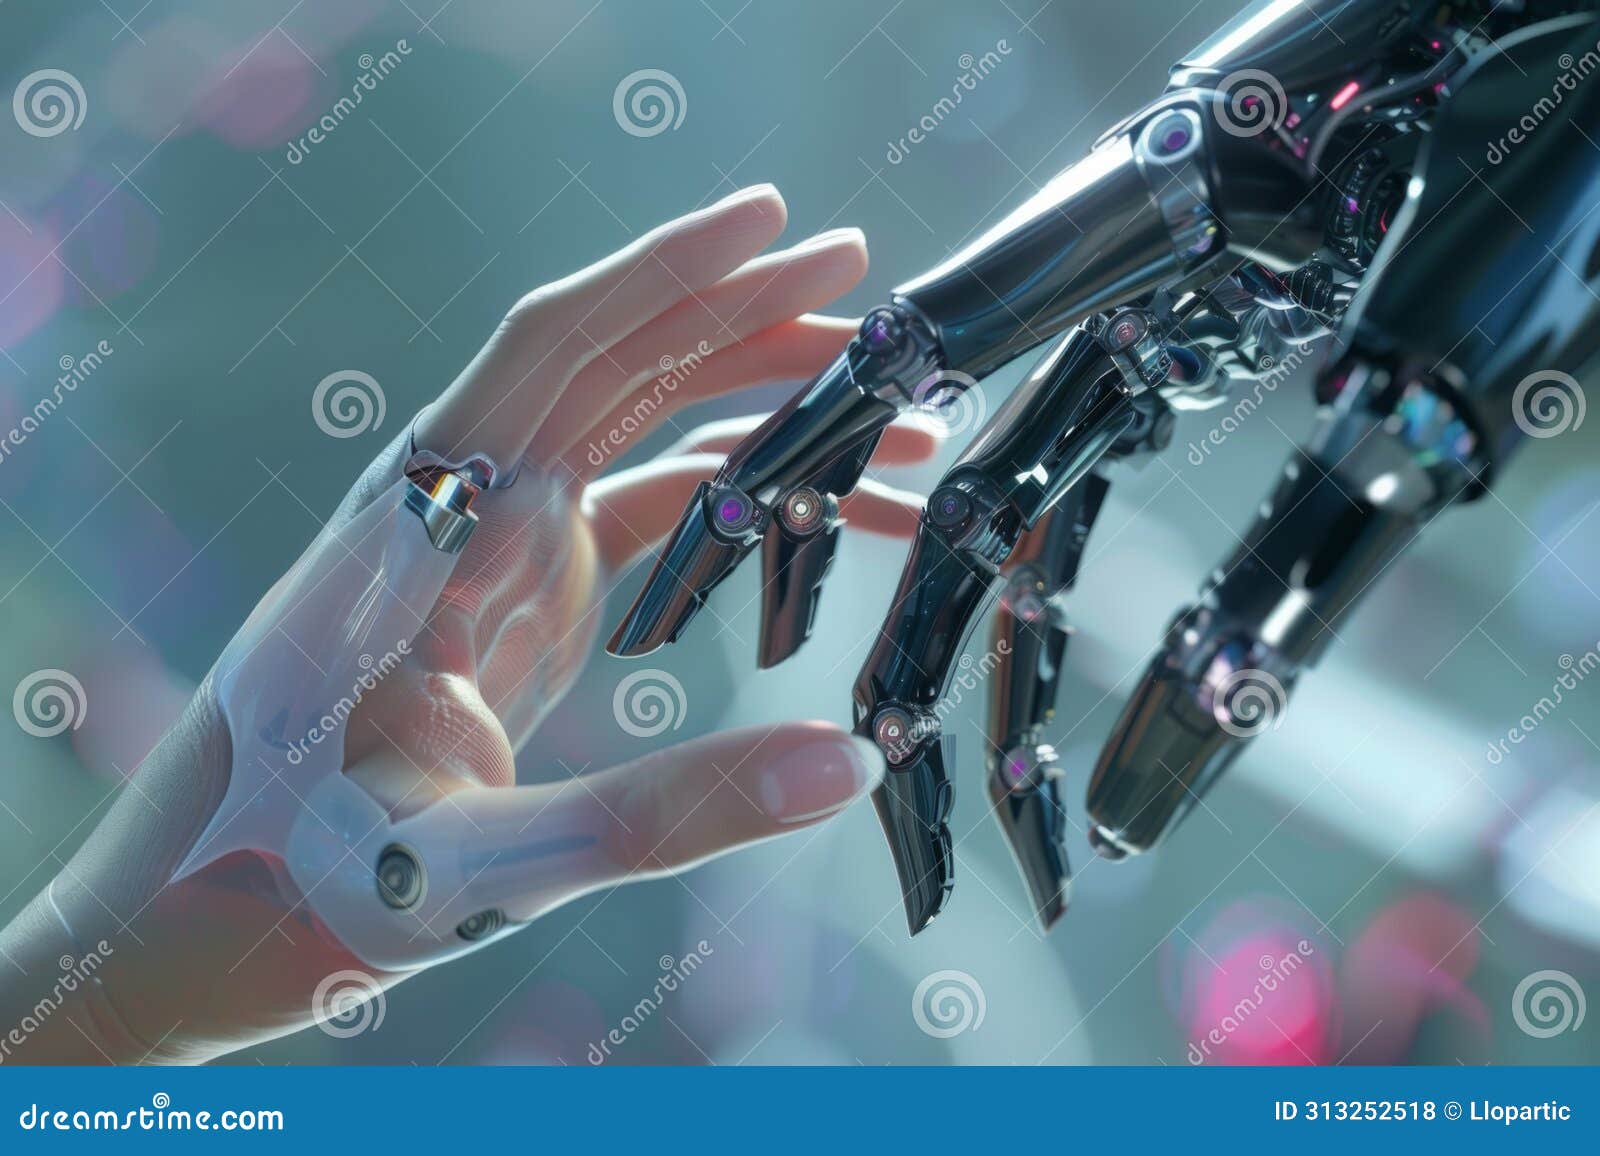 human and robot hand union: the convergence of biologies